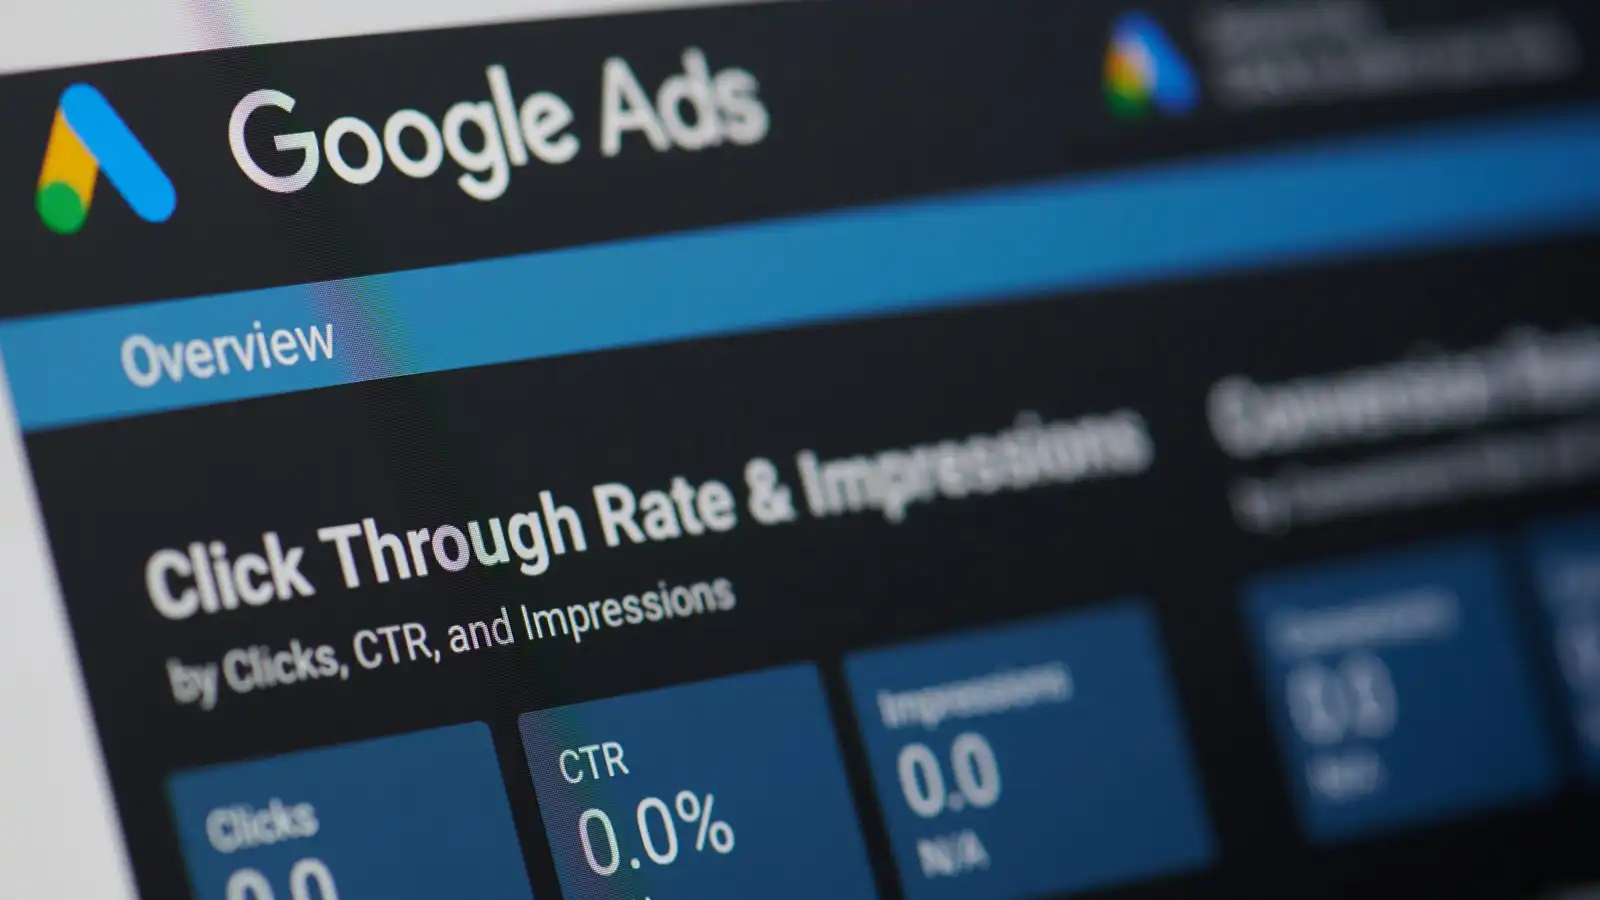 Ways To Make The Best Of The Five Latest Google Ads Features